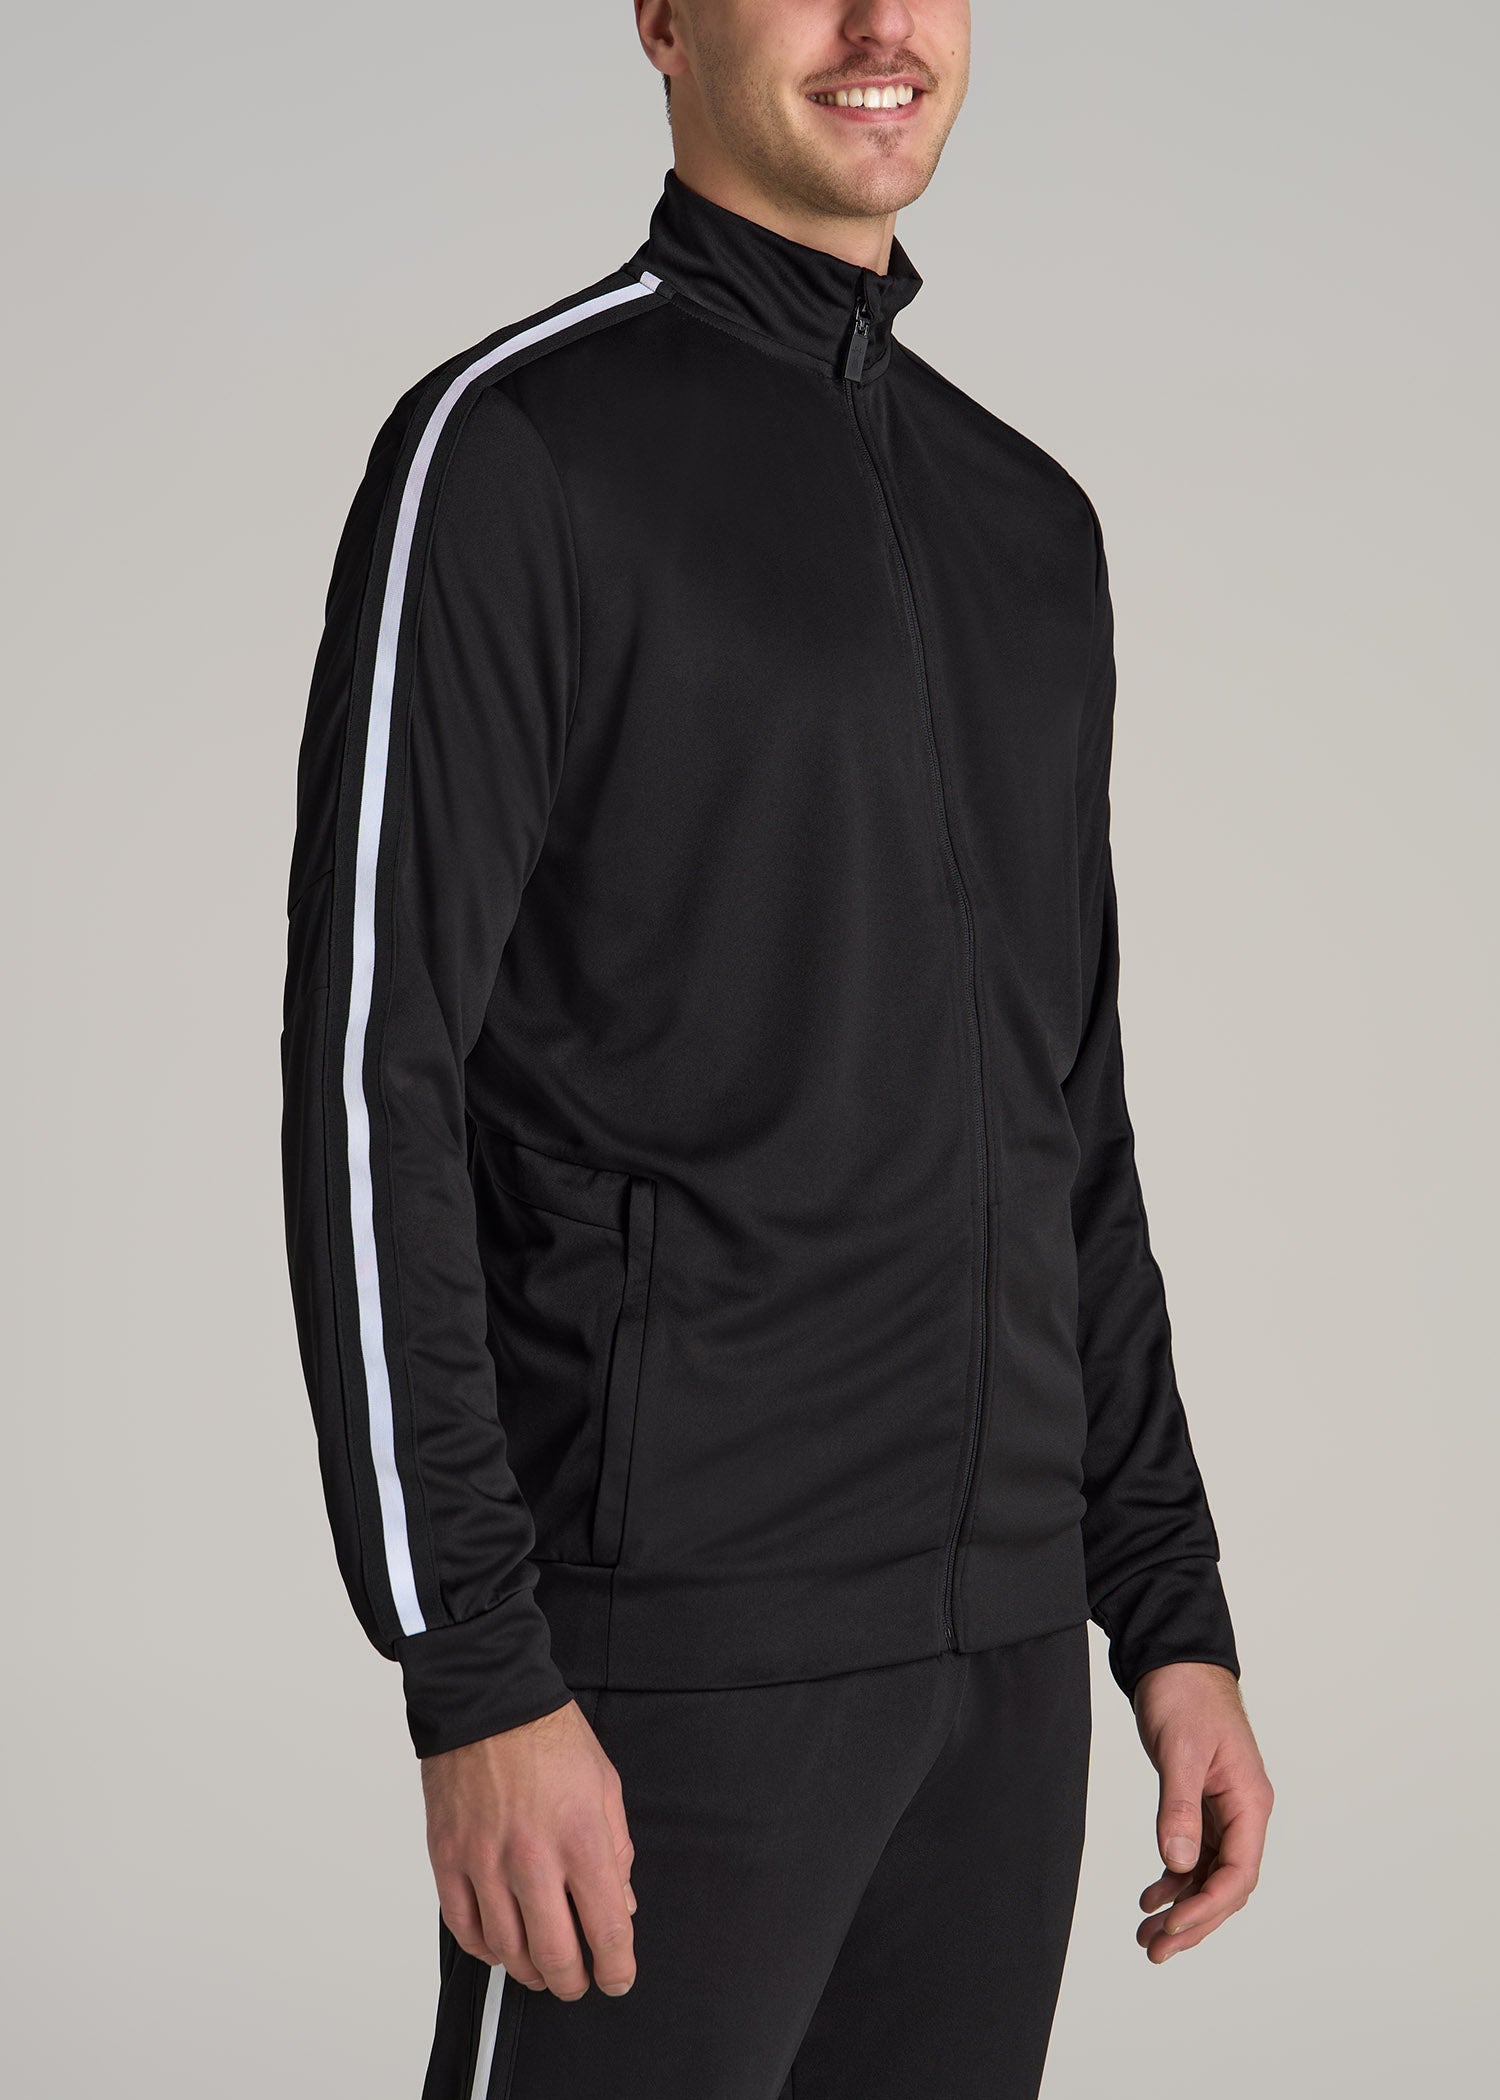 Tall Men's Athletic Black Jacket With White Stripes